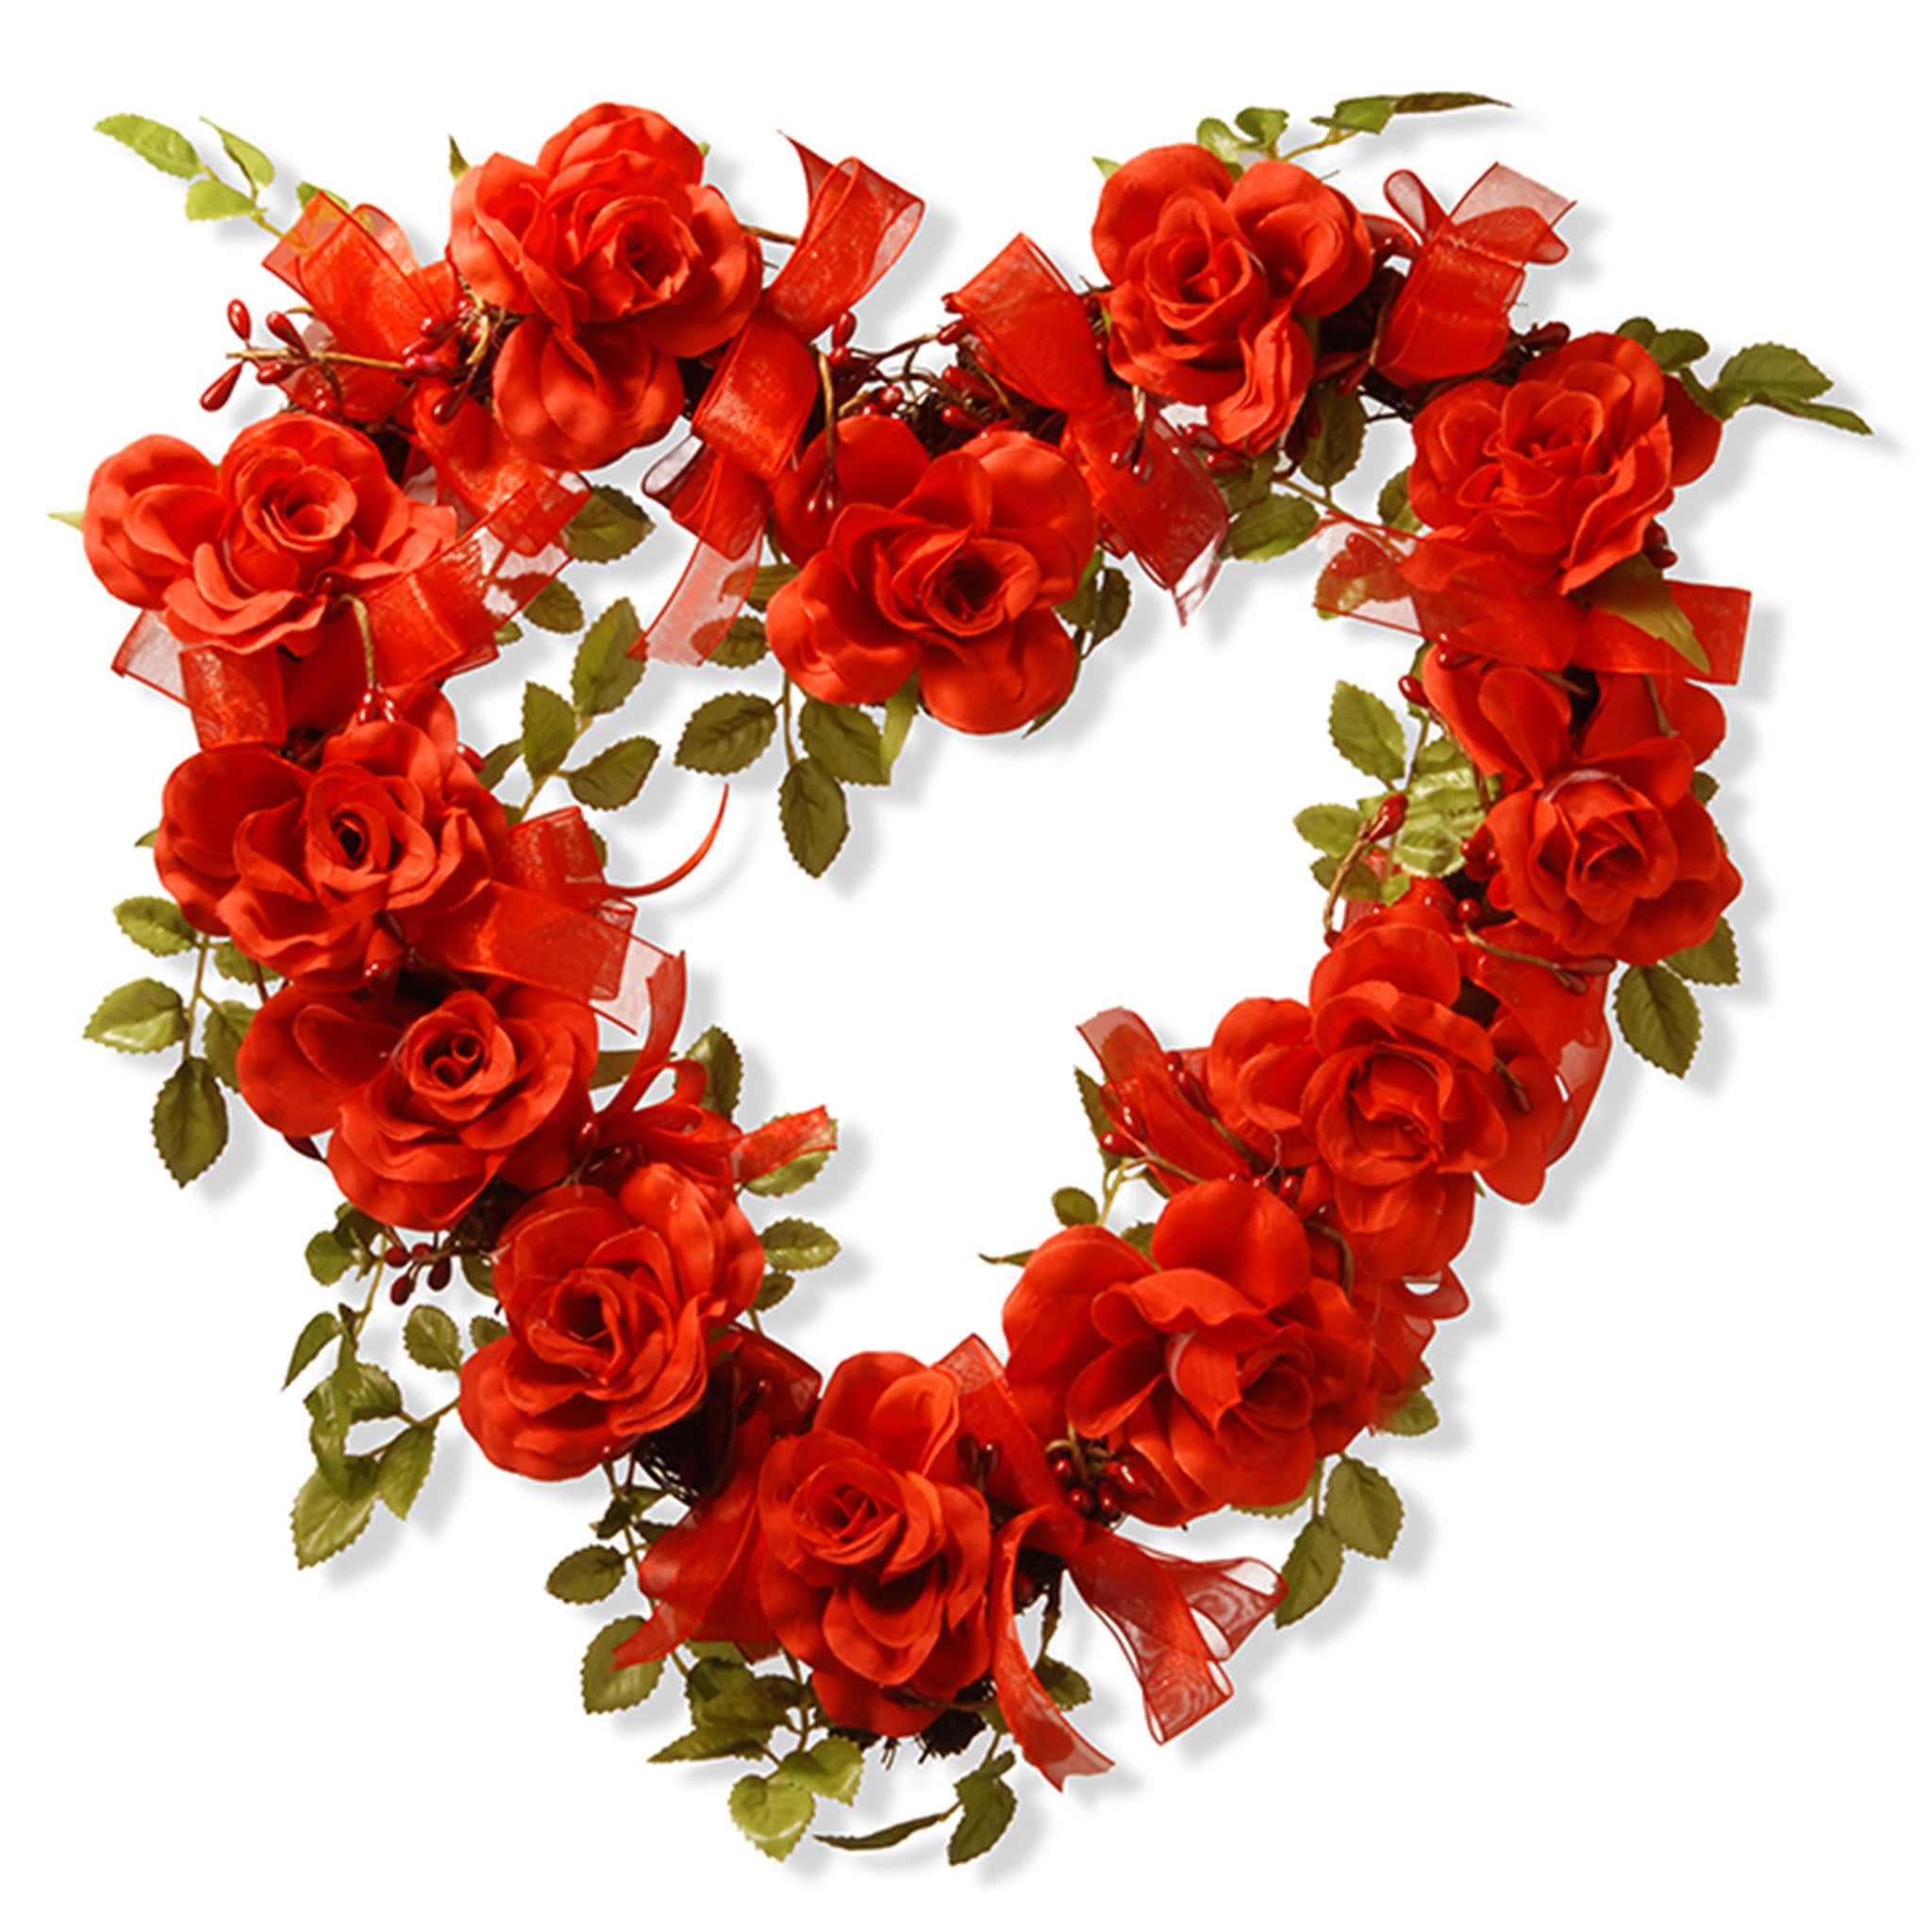 Artificial Valentine's Floral Heart Wreath, Decorated with Red